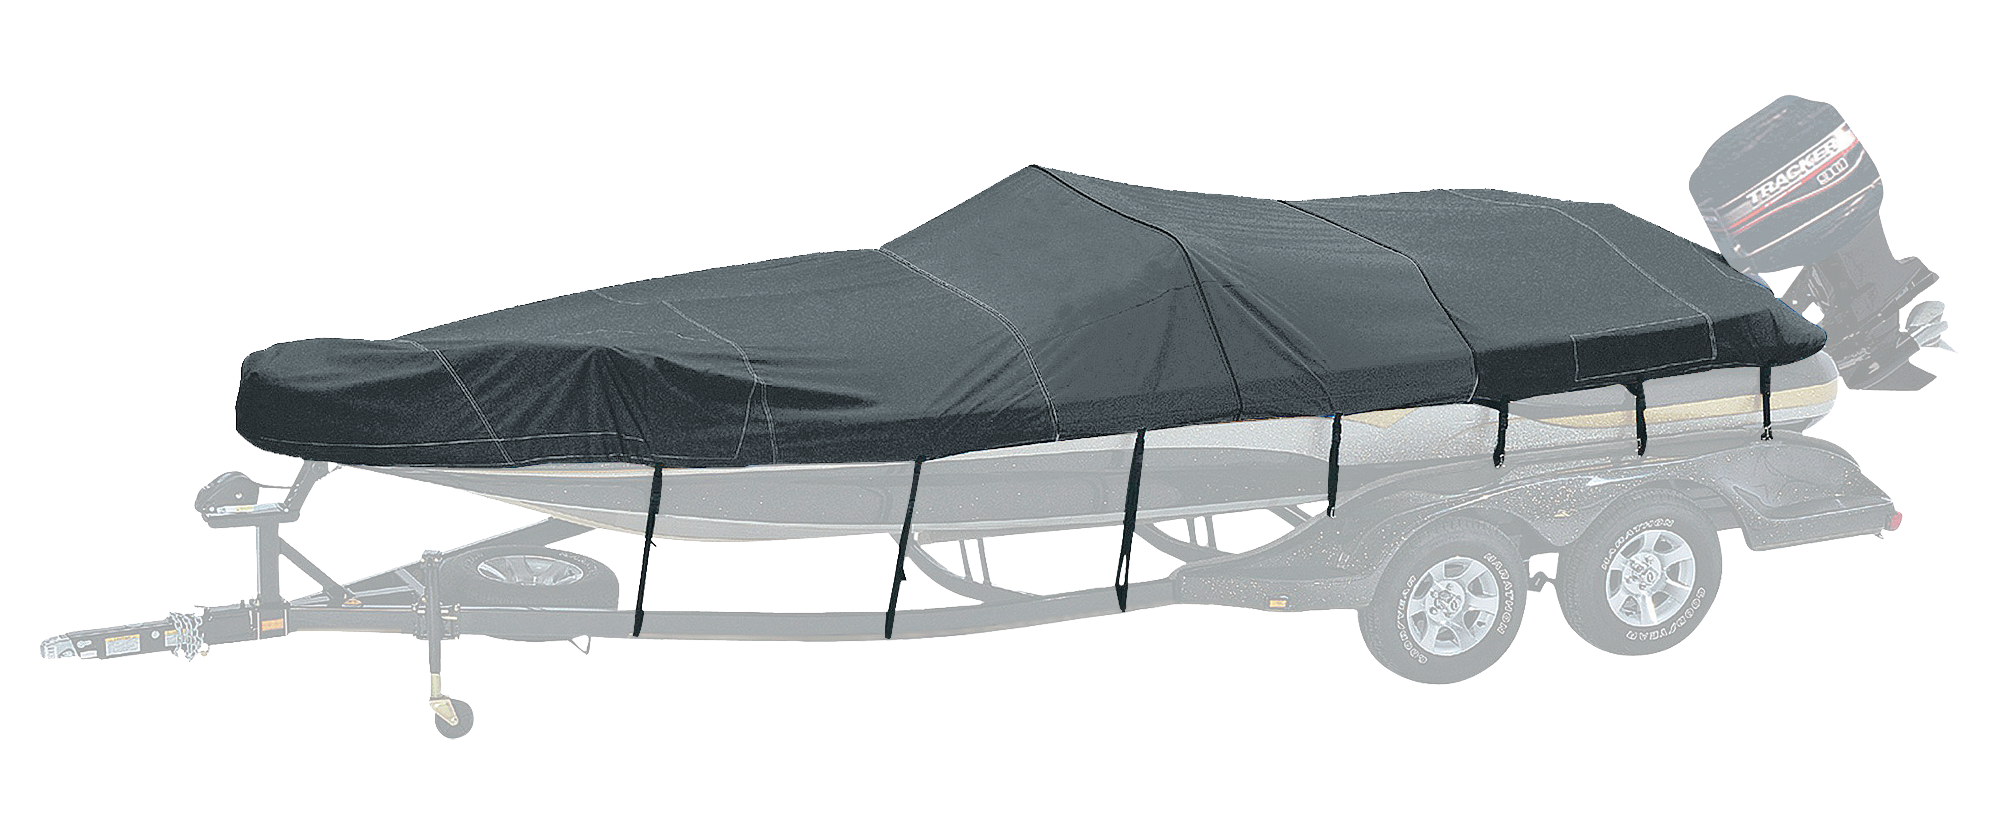 Bass Pro Shops Exact Fit Custom Boat Cover by Westland - Tracker Boats - 2002-2003 TX-17 SC - Charcoal